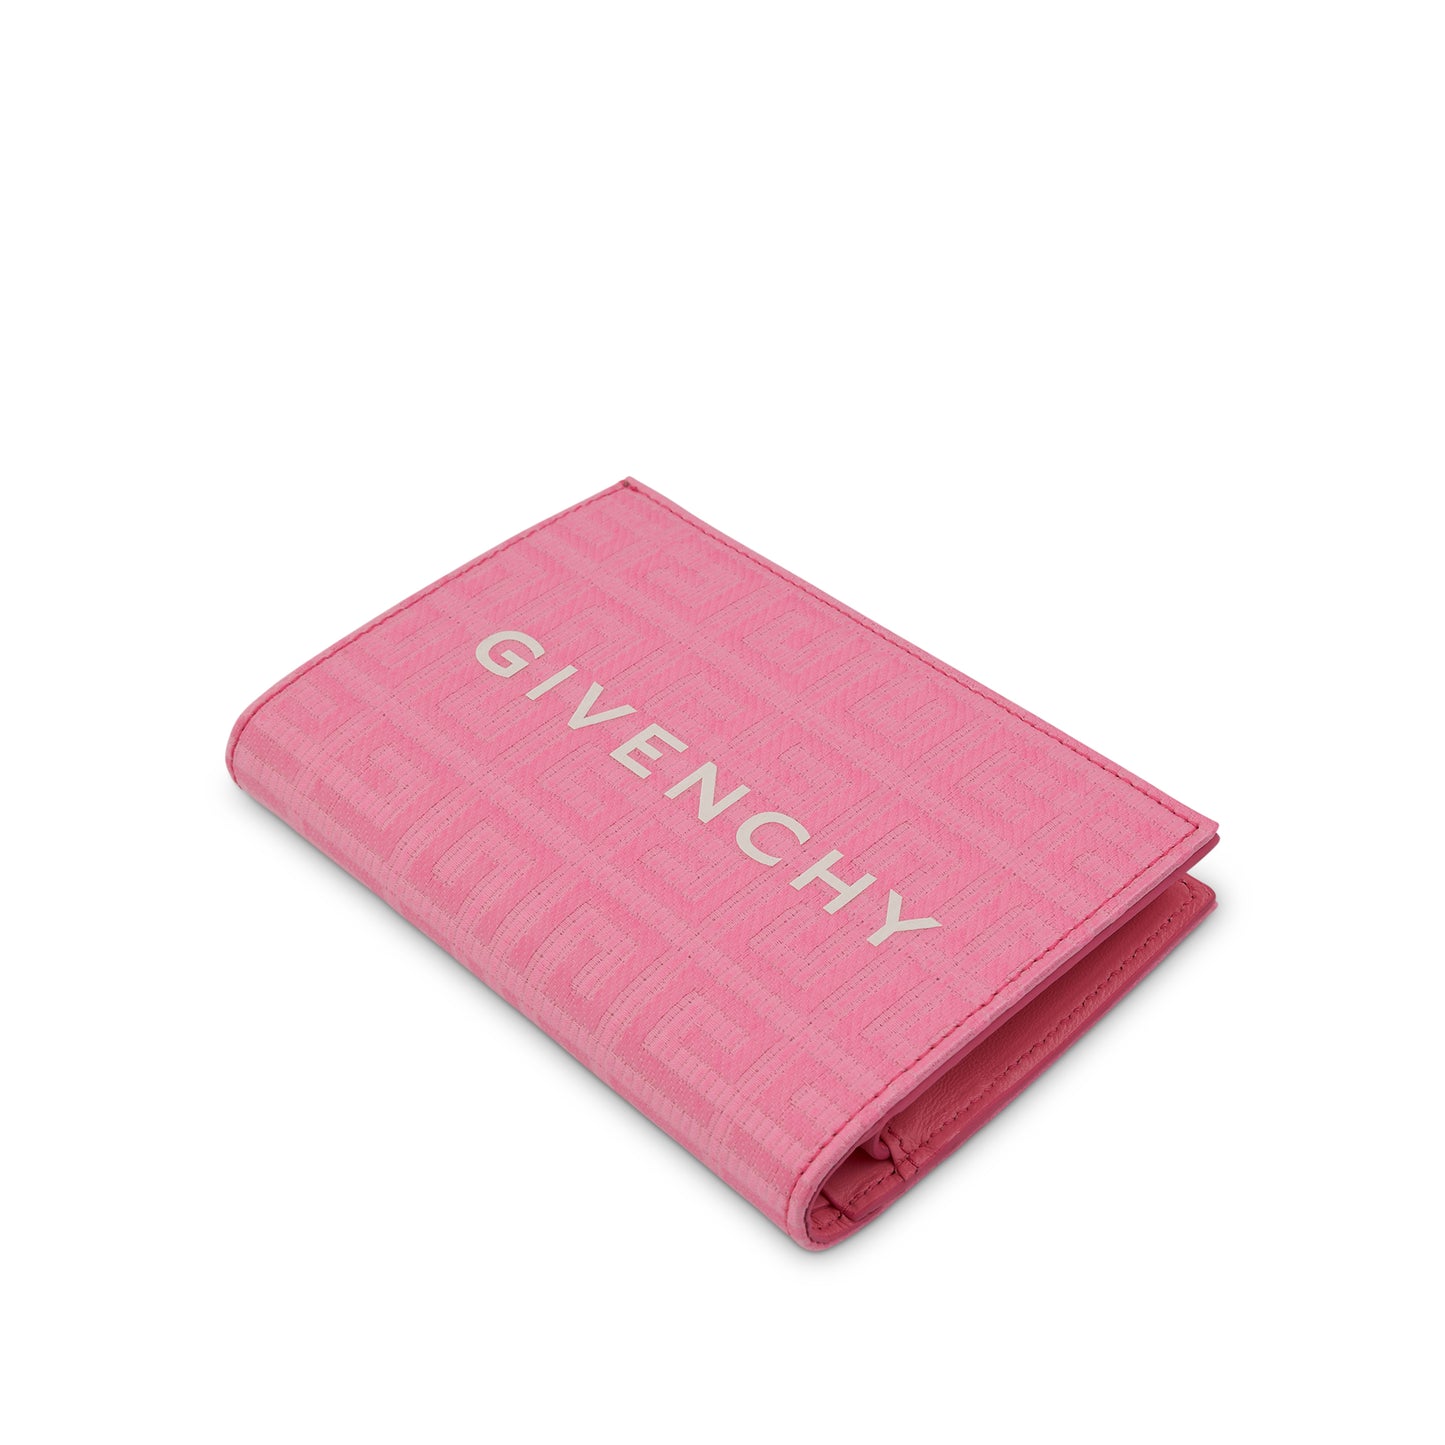 G Cut Bifold Wallet in 4G Coated Canvas in Bright Pink